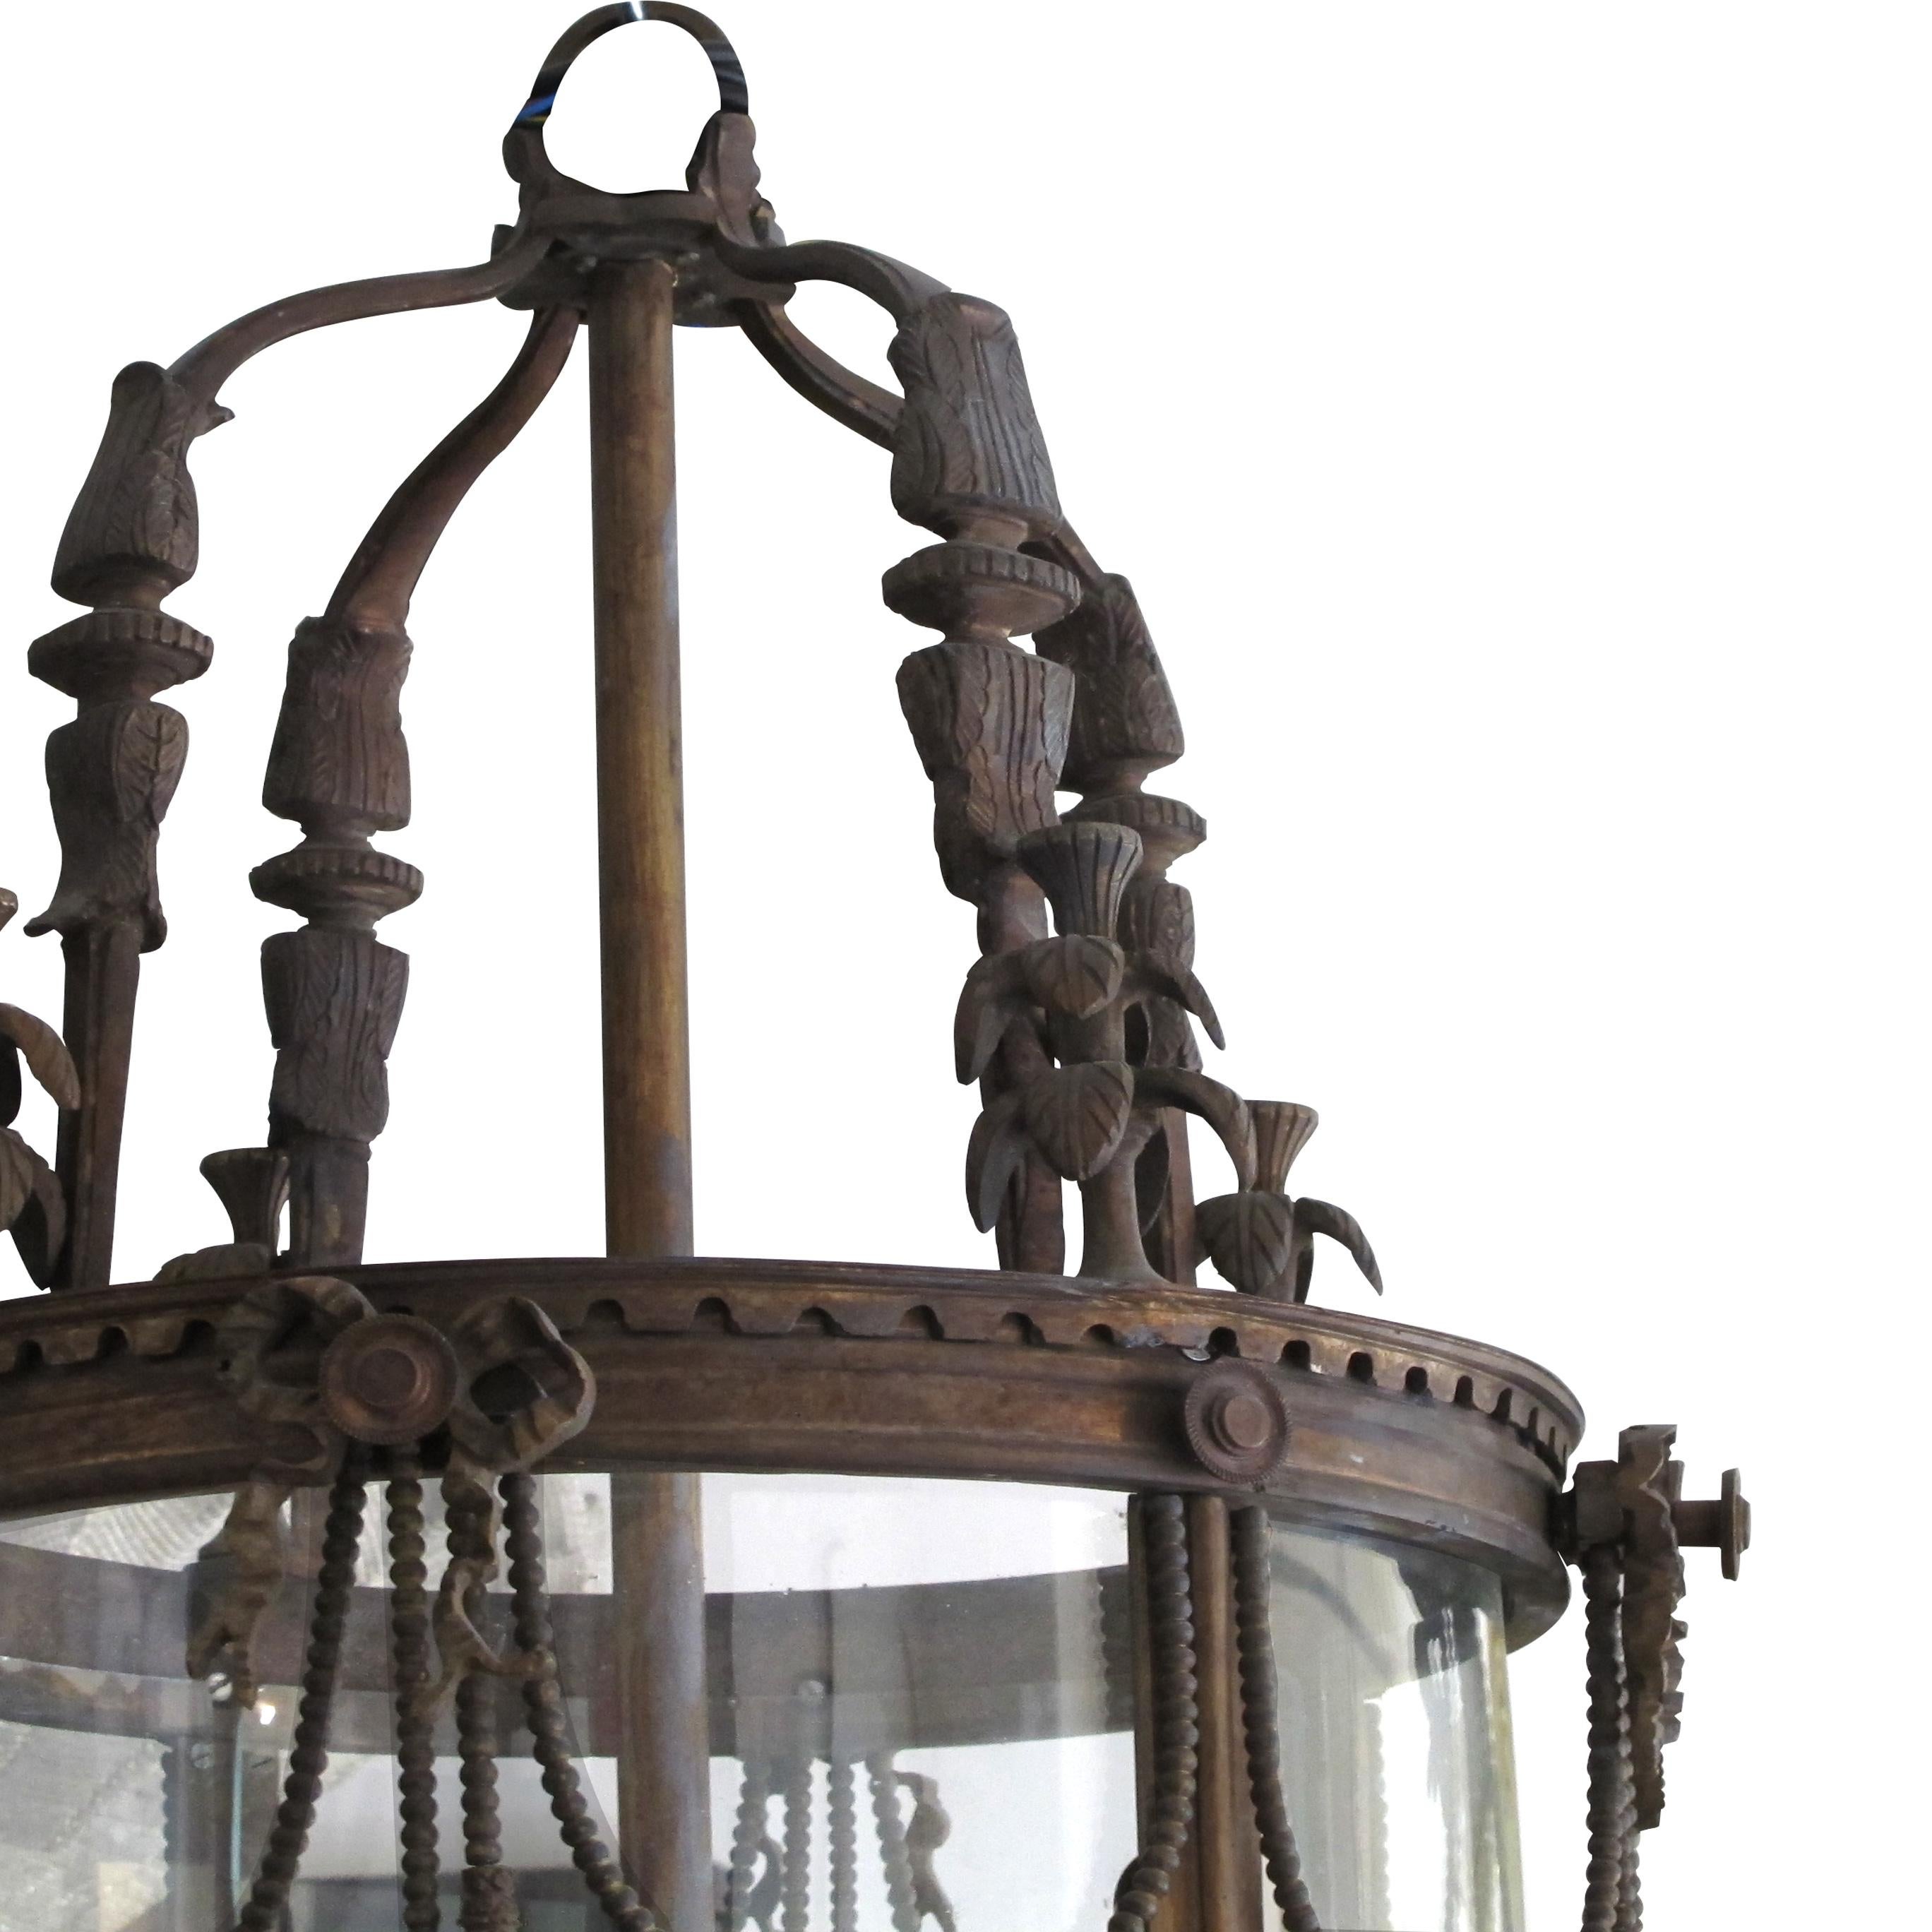 This very elegant 4-branch French lantern is from the 1960s in the style of Louis XVI and is crafted from bronze and features graceful and delicate ornaments such as garlands, ribbons, and swags. The lantern holds its original one-piece curved